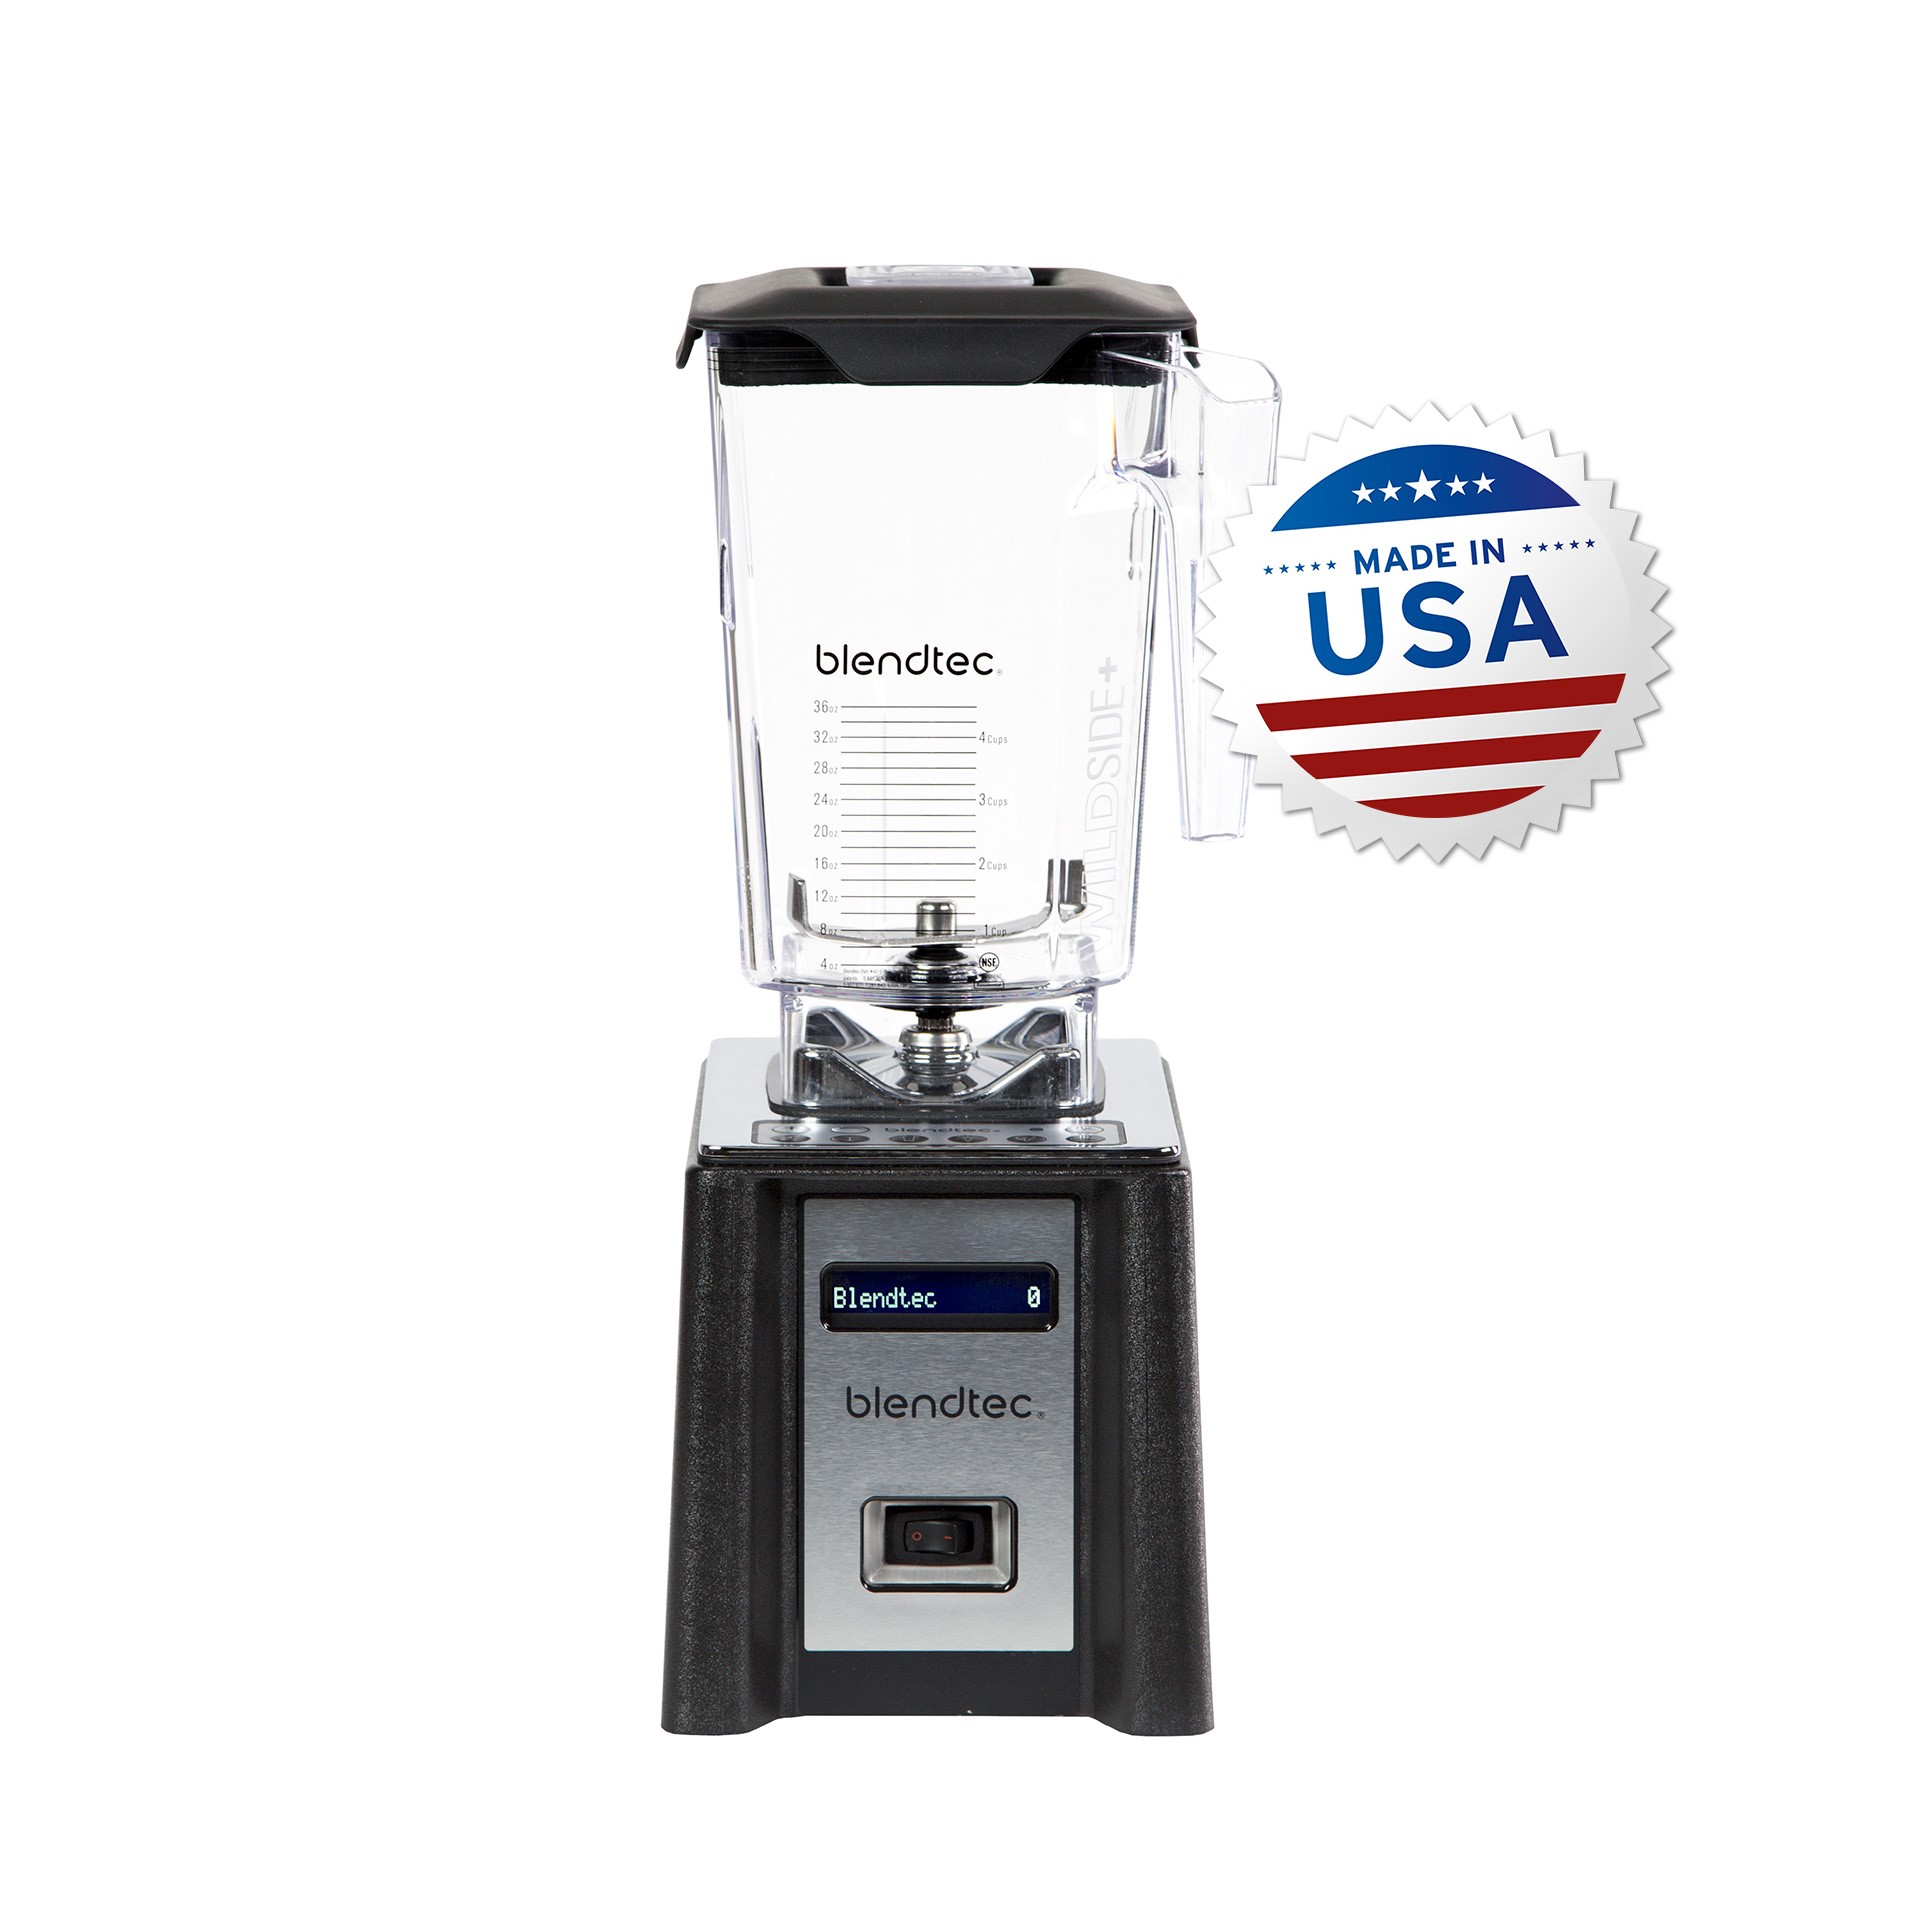 Blendtec Professional 750 made in USA